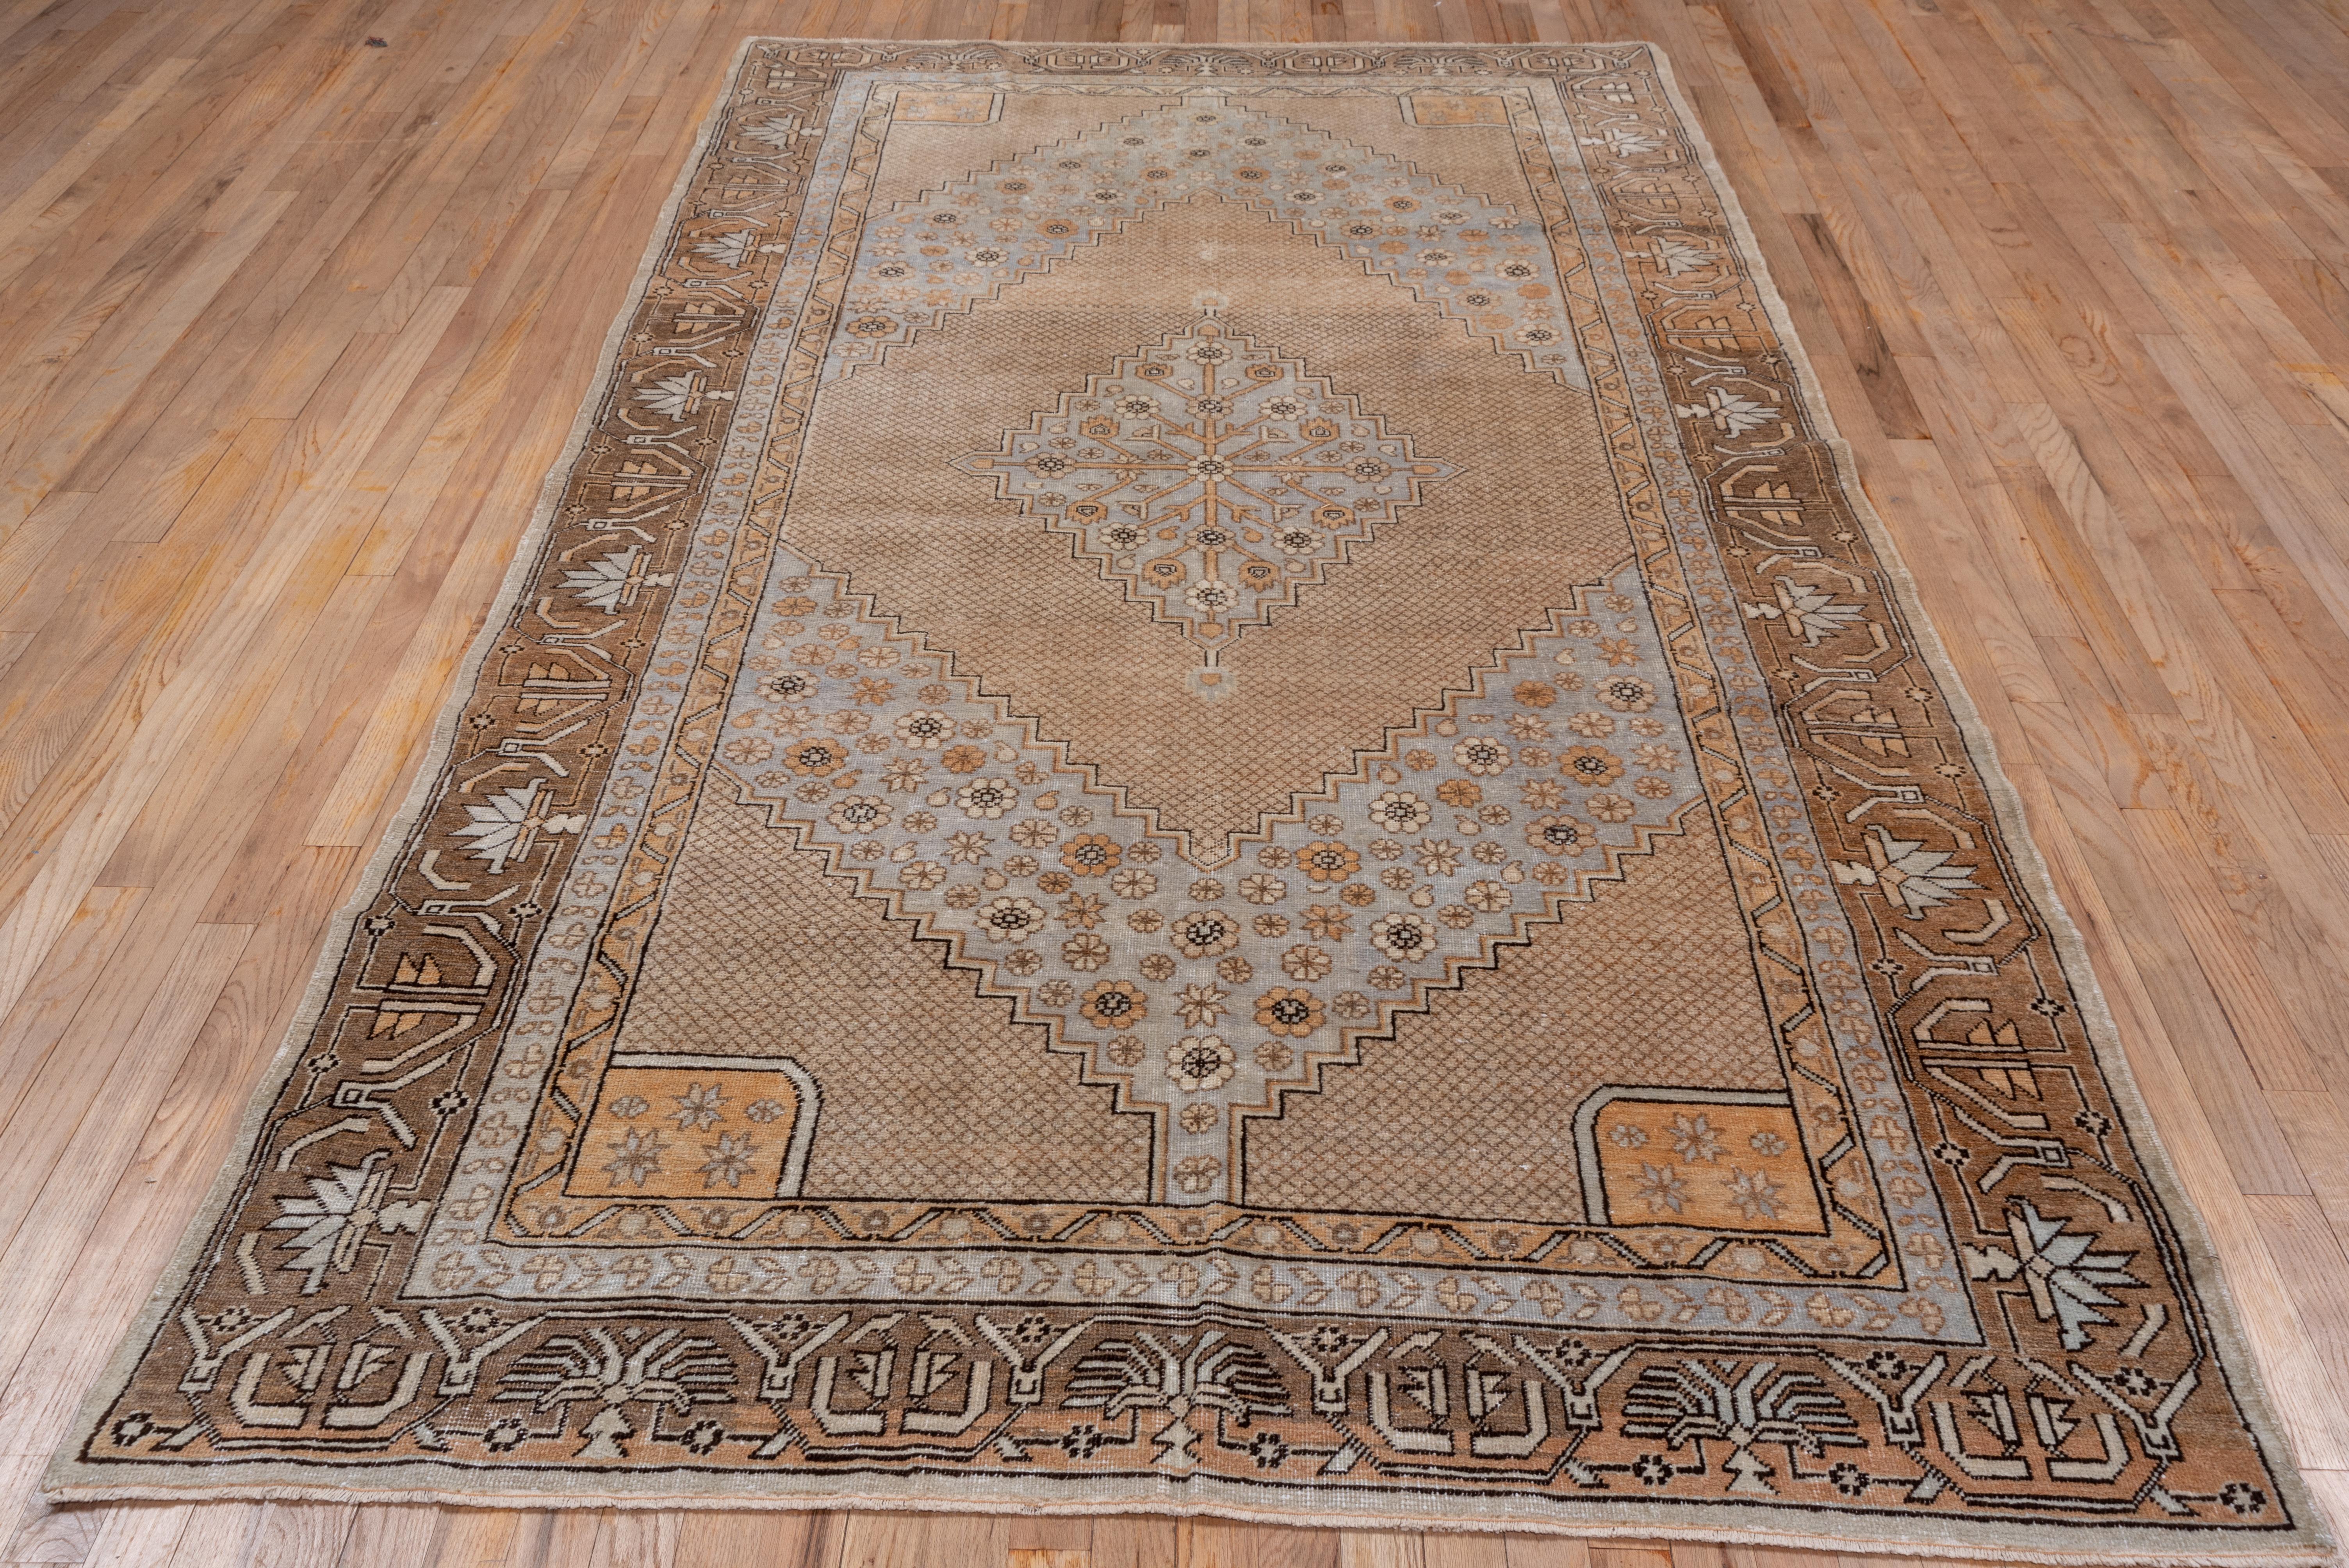 The corners are stepped in a small diamond lattice design, as is the subfield supporting a pale blue-grey stepped medallion enclosing a rosette trellis. Rosettes and botehs float freely on the pale blue-grey ground of this Xinjiang oasis town rug in